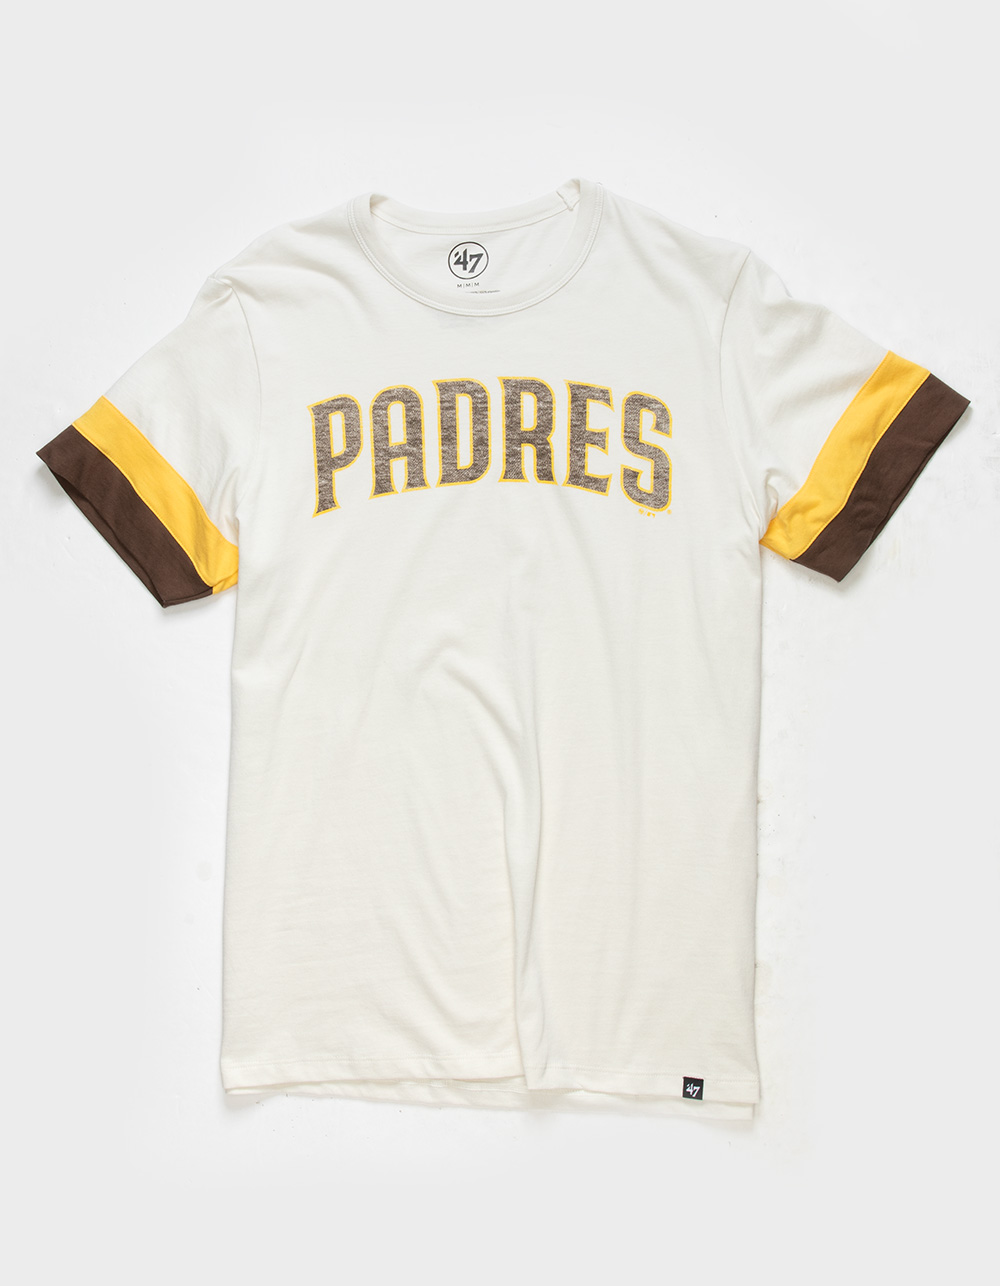 47 Brand Padres Winslow Tee - White - Small